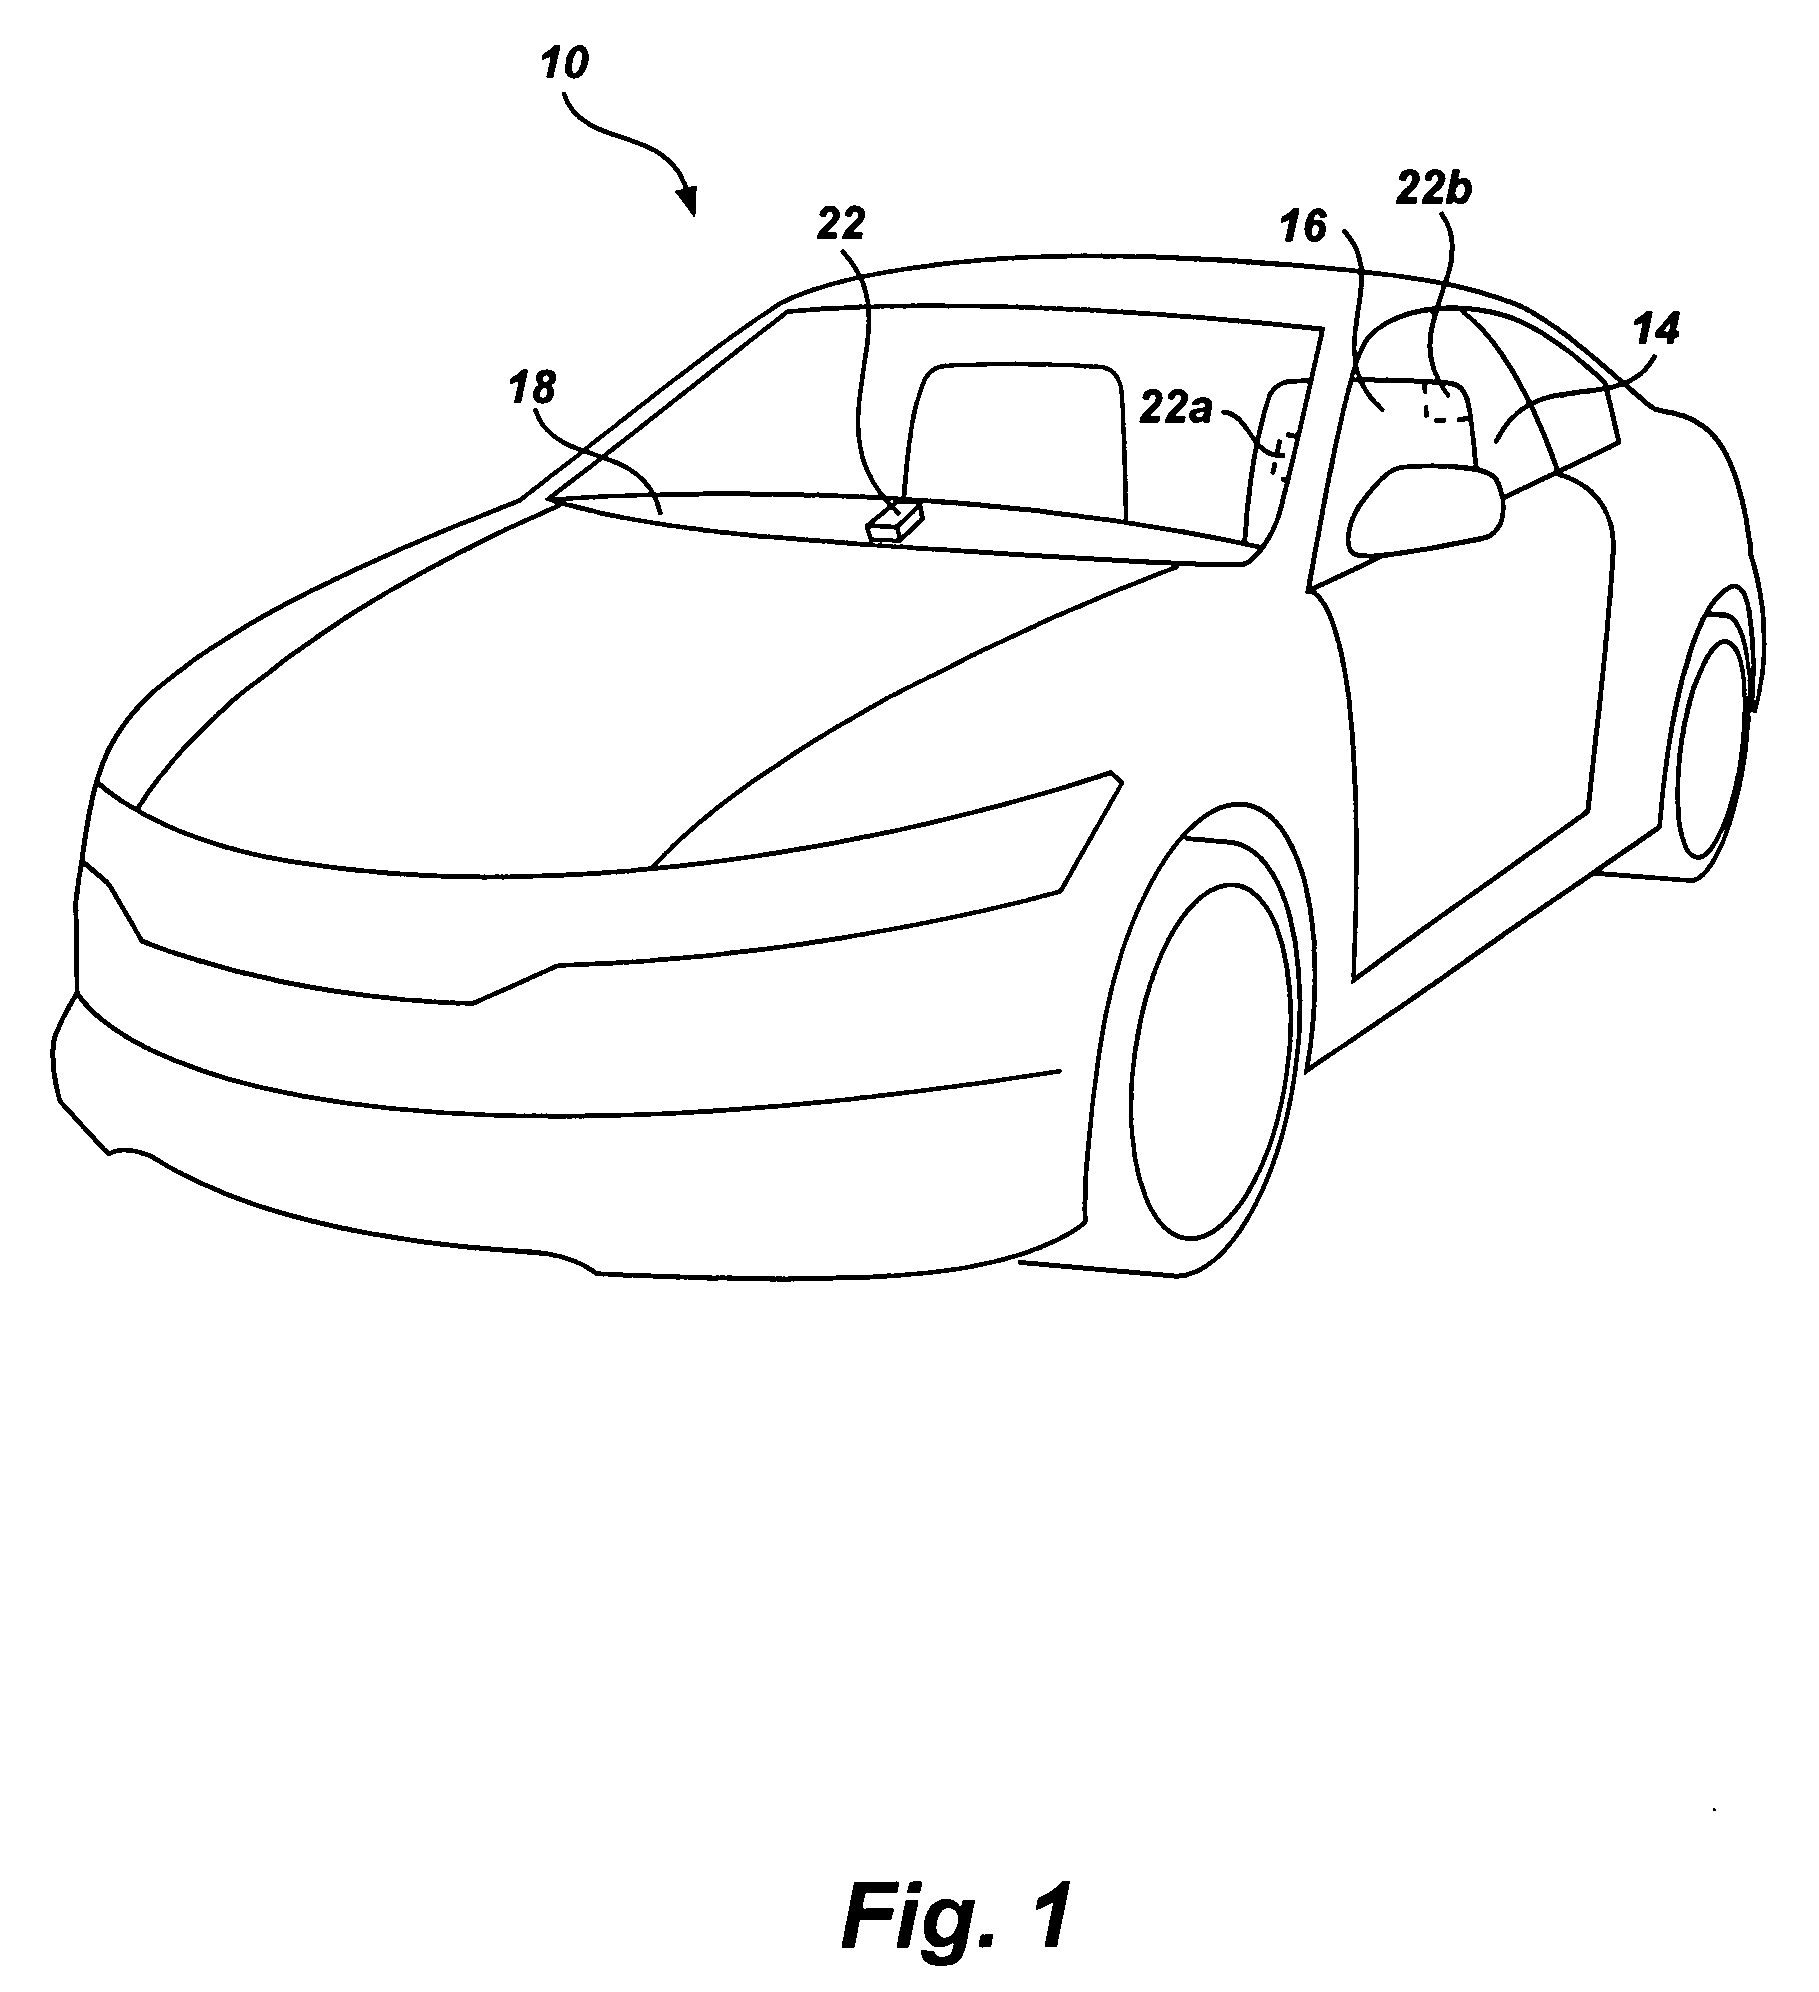 Mobile telephone jamming system for automobiles